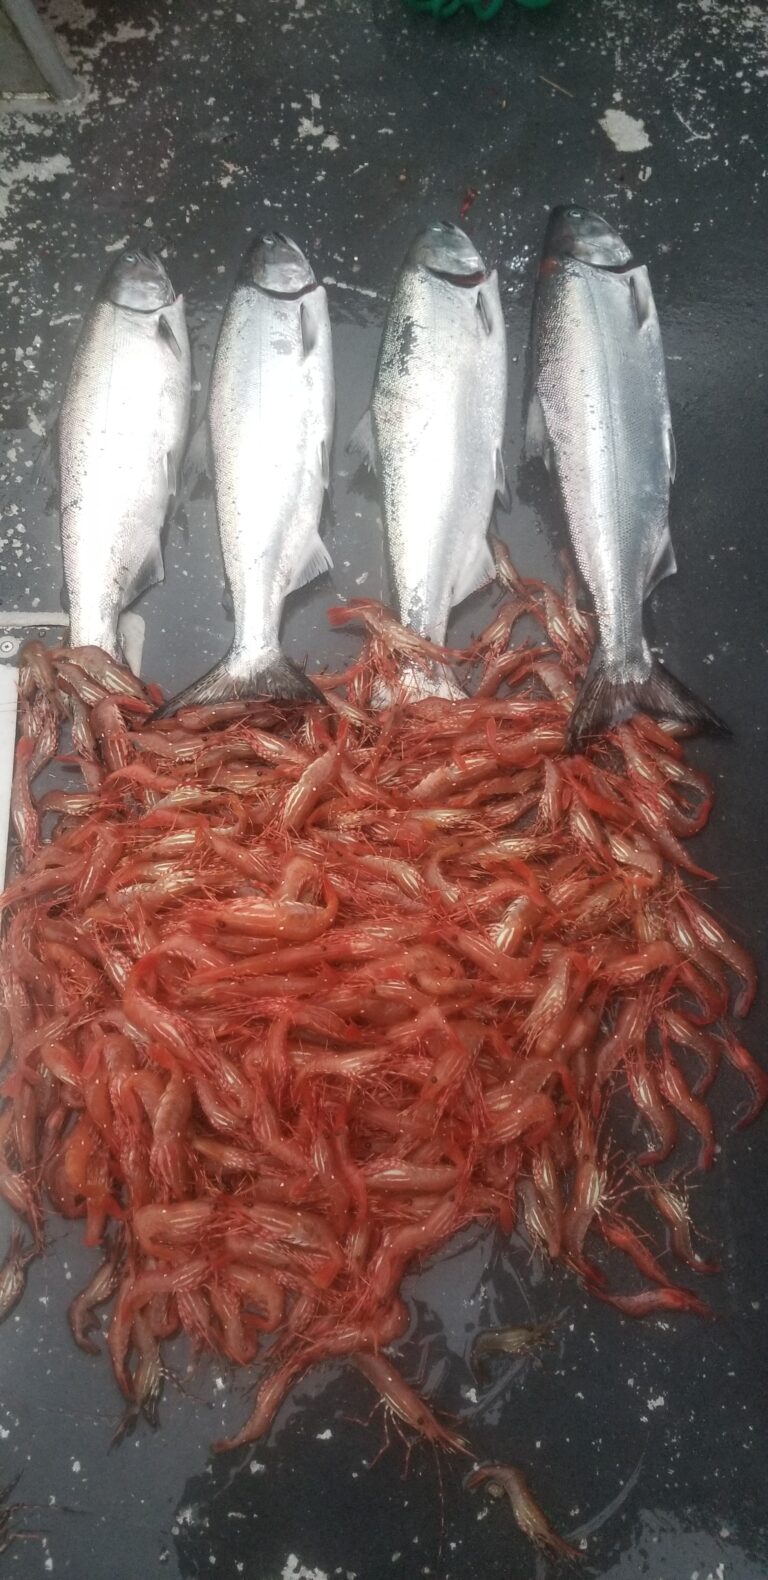 A pile of freshly caught prawns